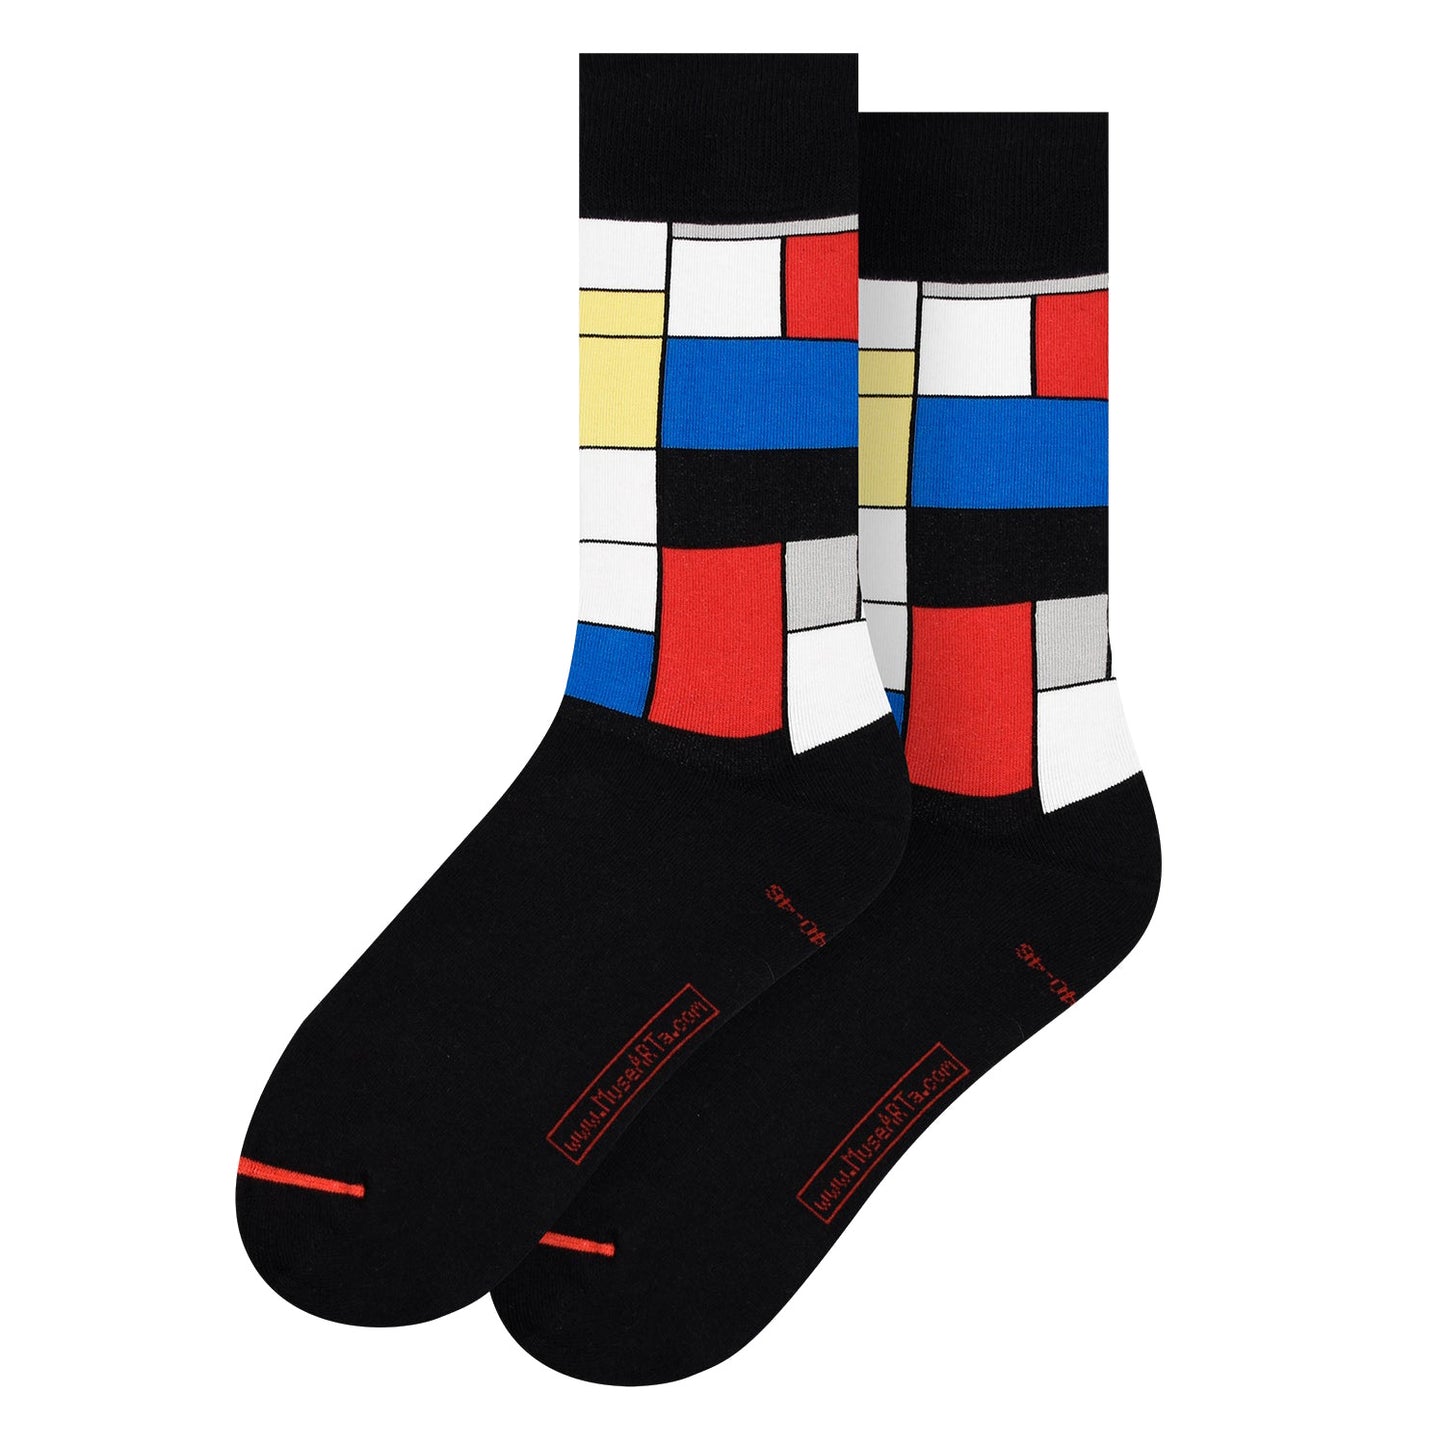 Mondrian's Composition with Red, Blue, and Yellow Socks